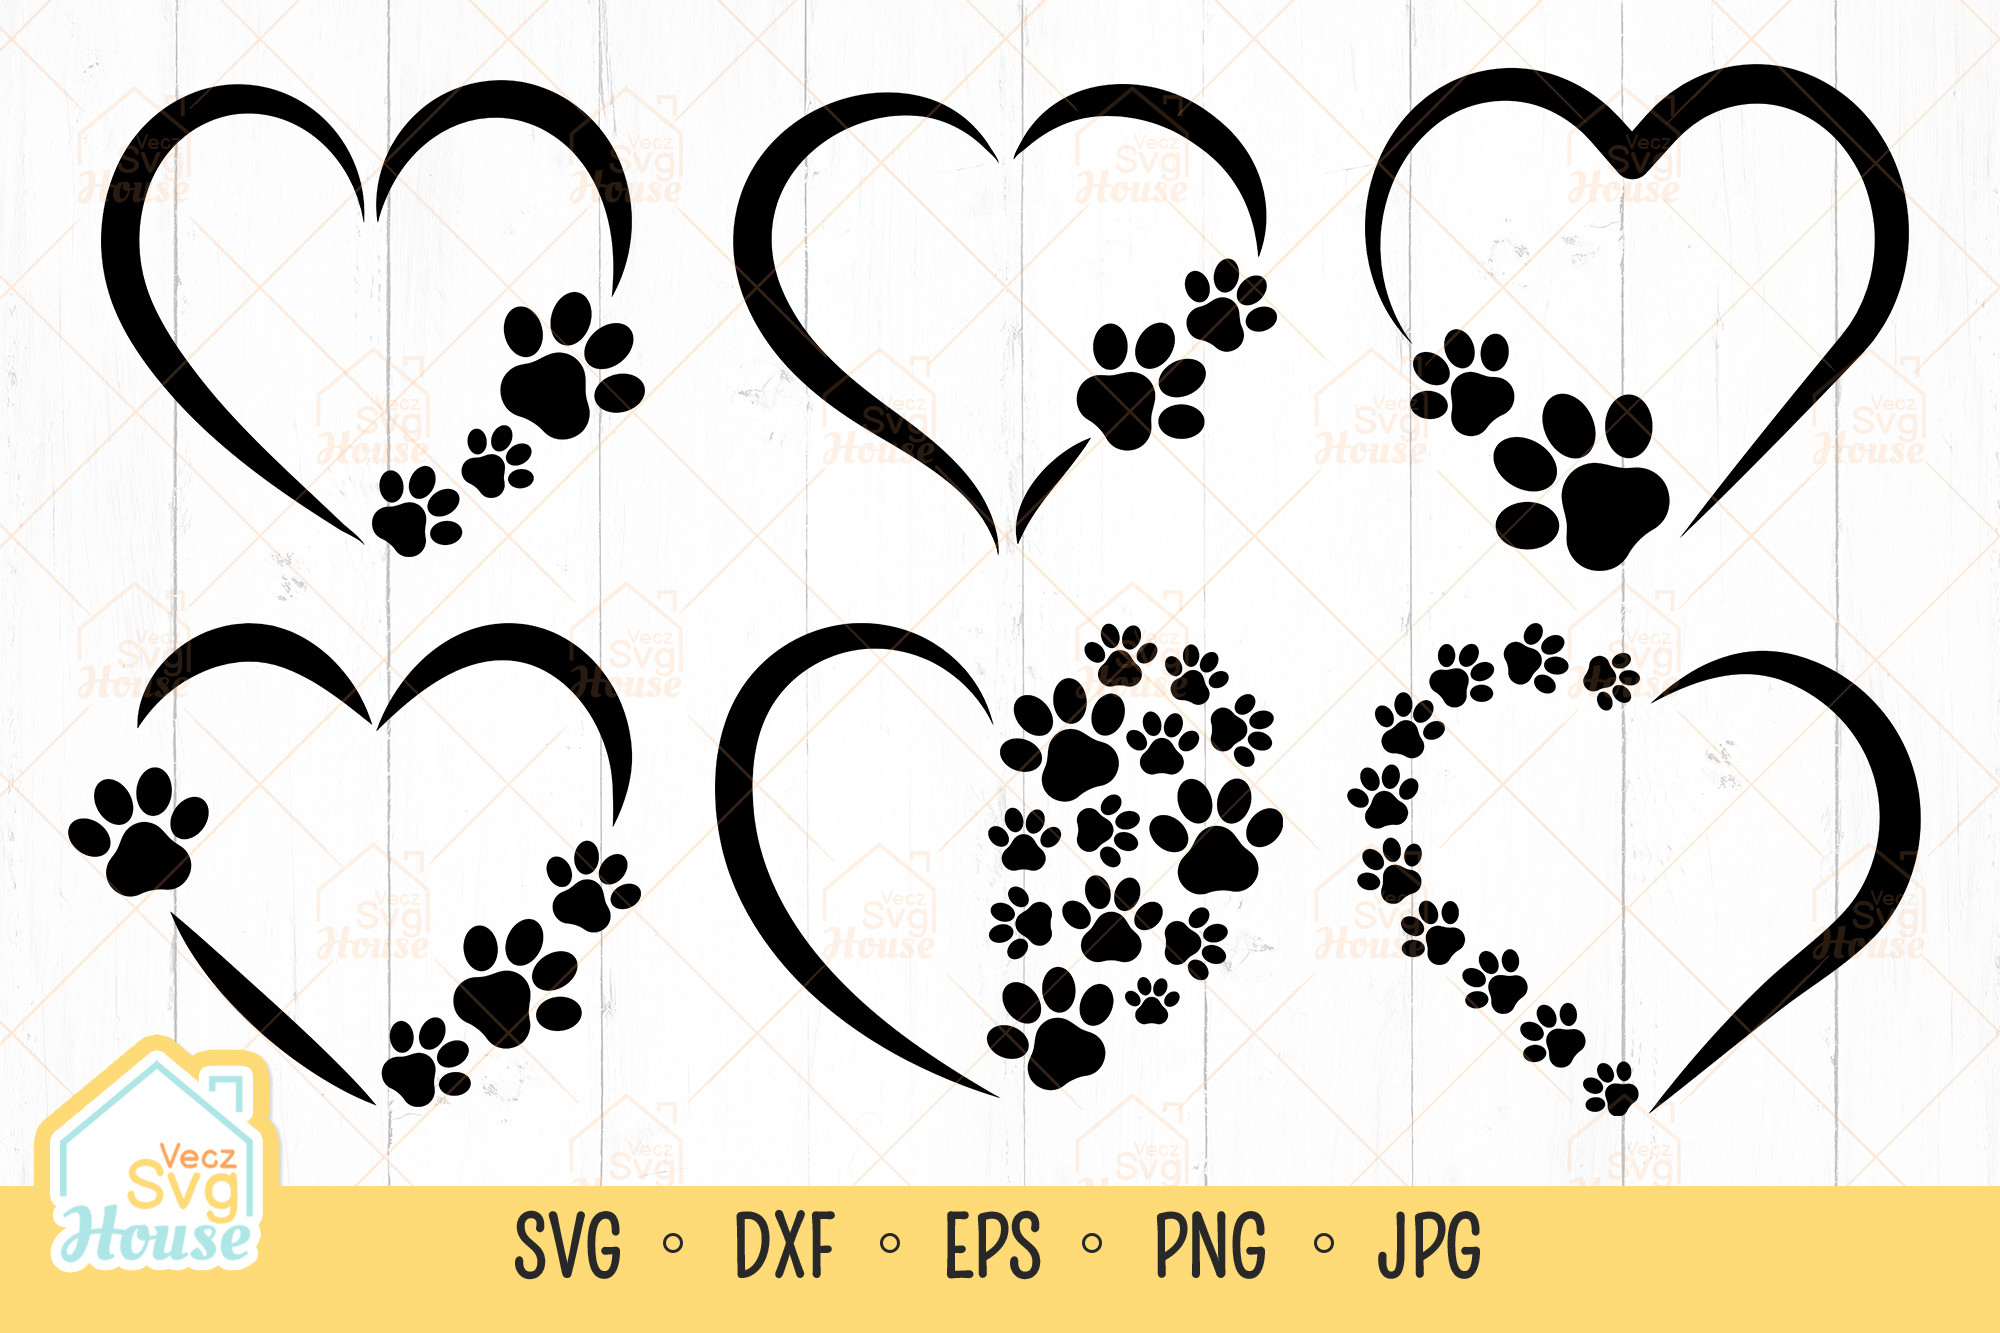 Dog Paw Print Heart Frame Monogram SVG Graphic by VeczSvgHouse